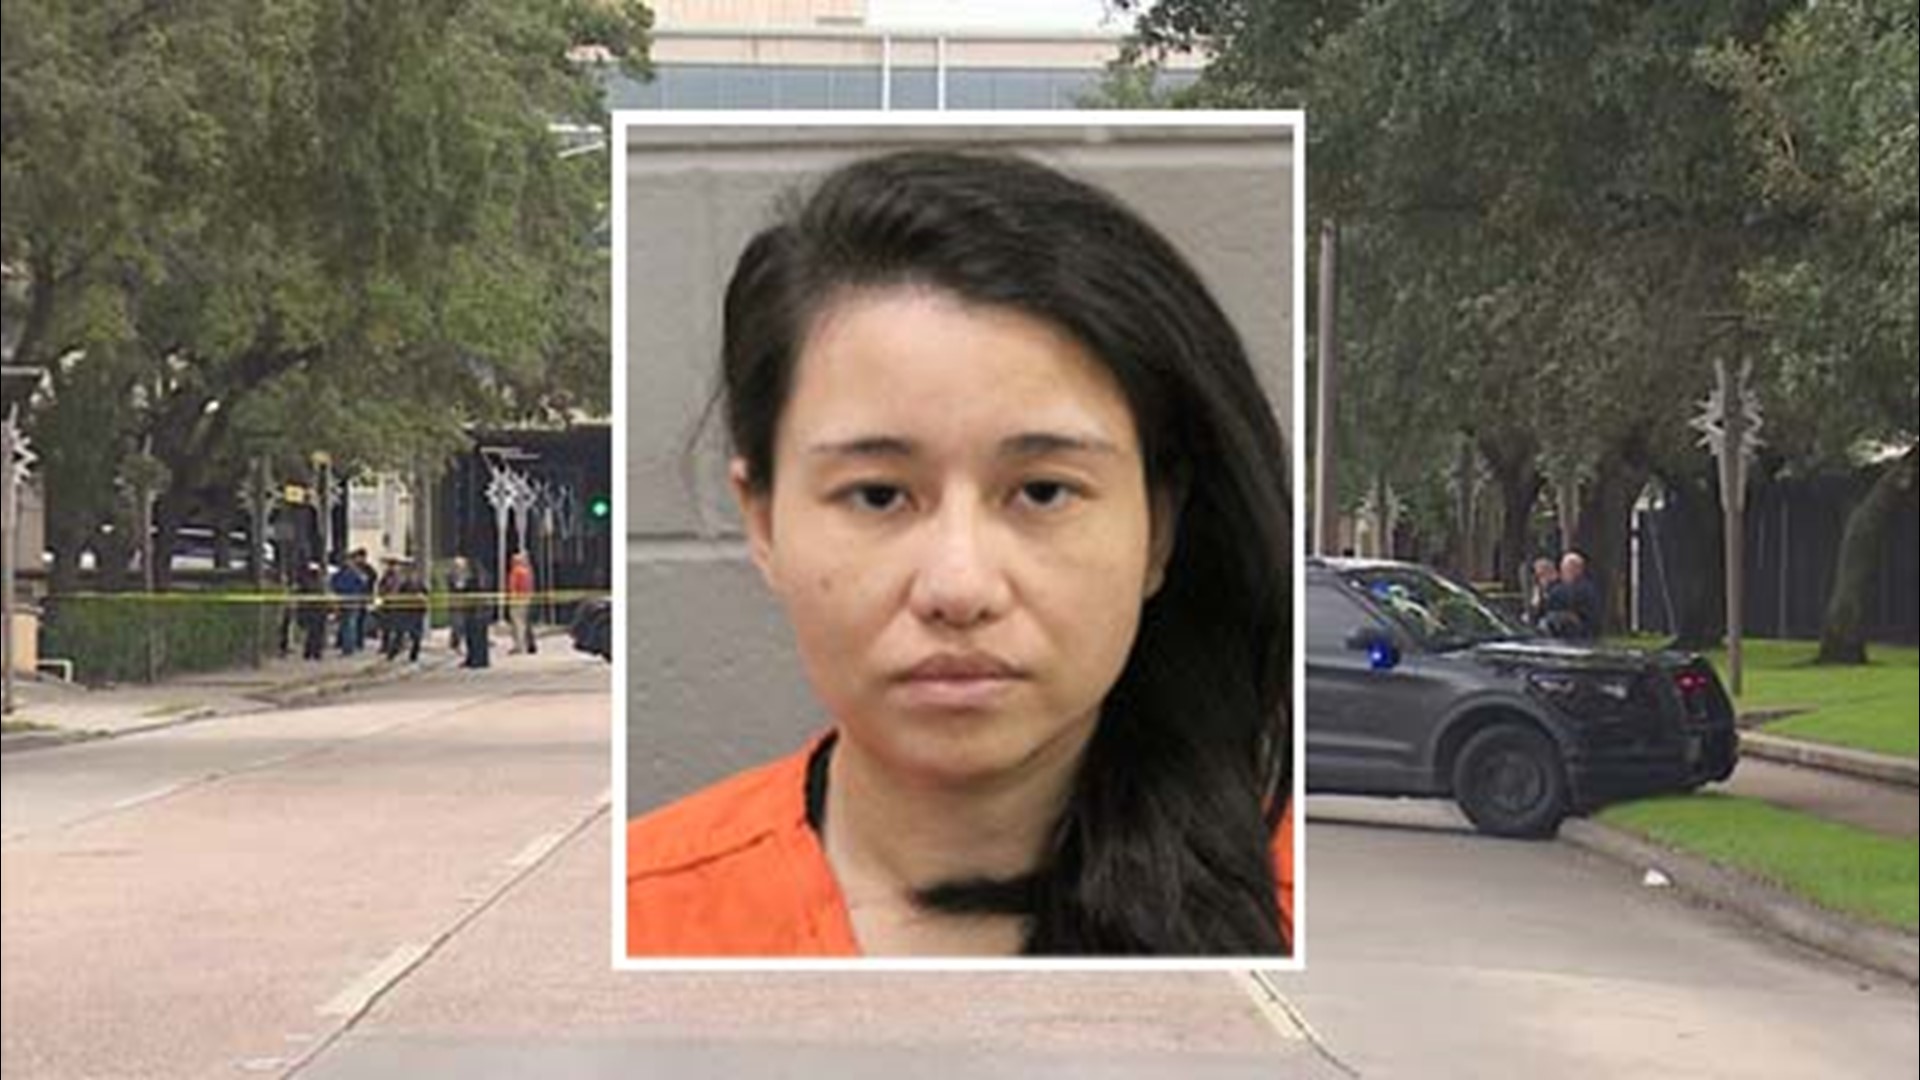 Kaysone Sky Blossom is accused of stabbing Kayla Stevenson to death last weekend and stealing her purse as the young mother was walking to work near the Galleria.